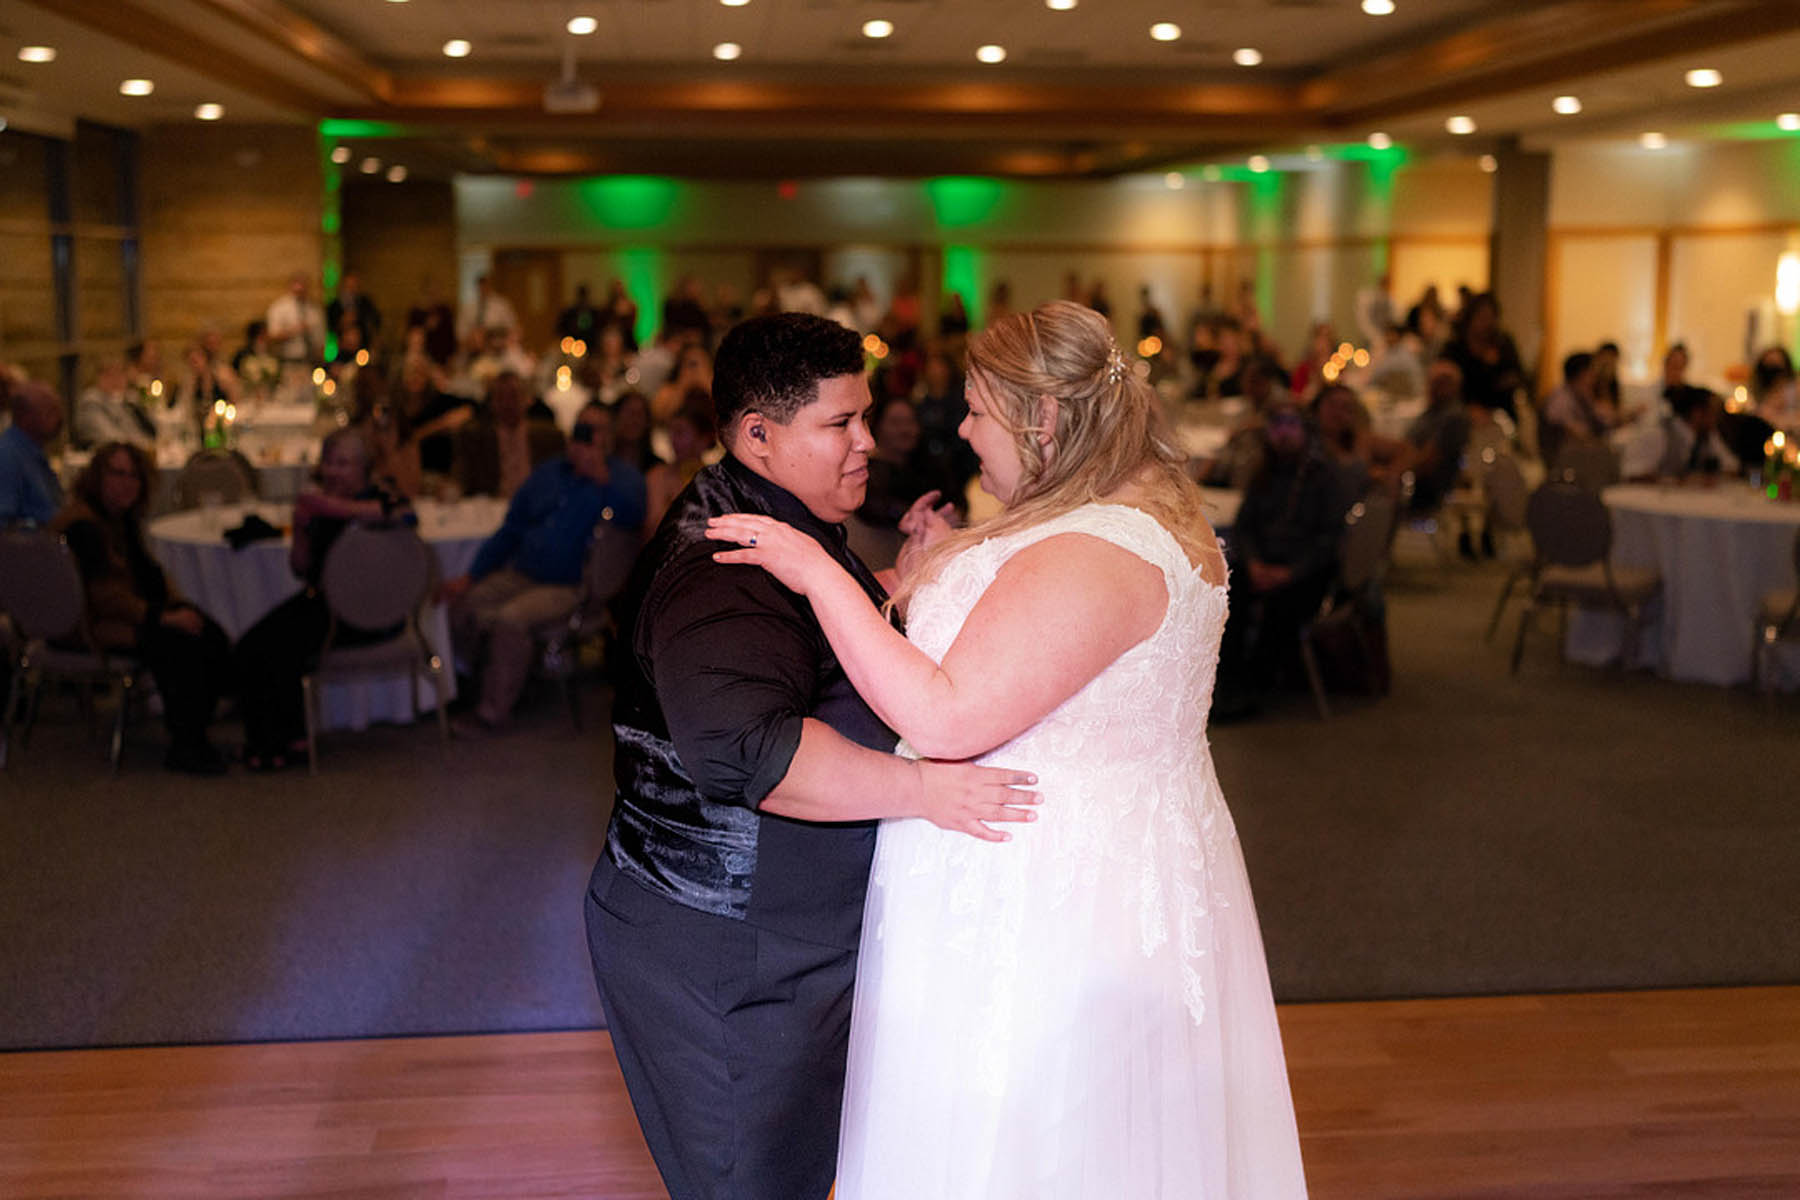 Two brides, one white and one black, share a first dance and gaze into each other's eyes.